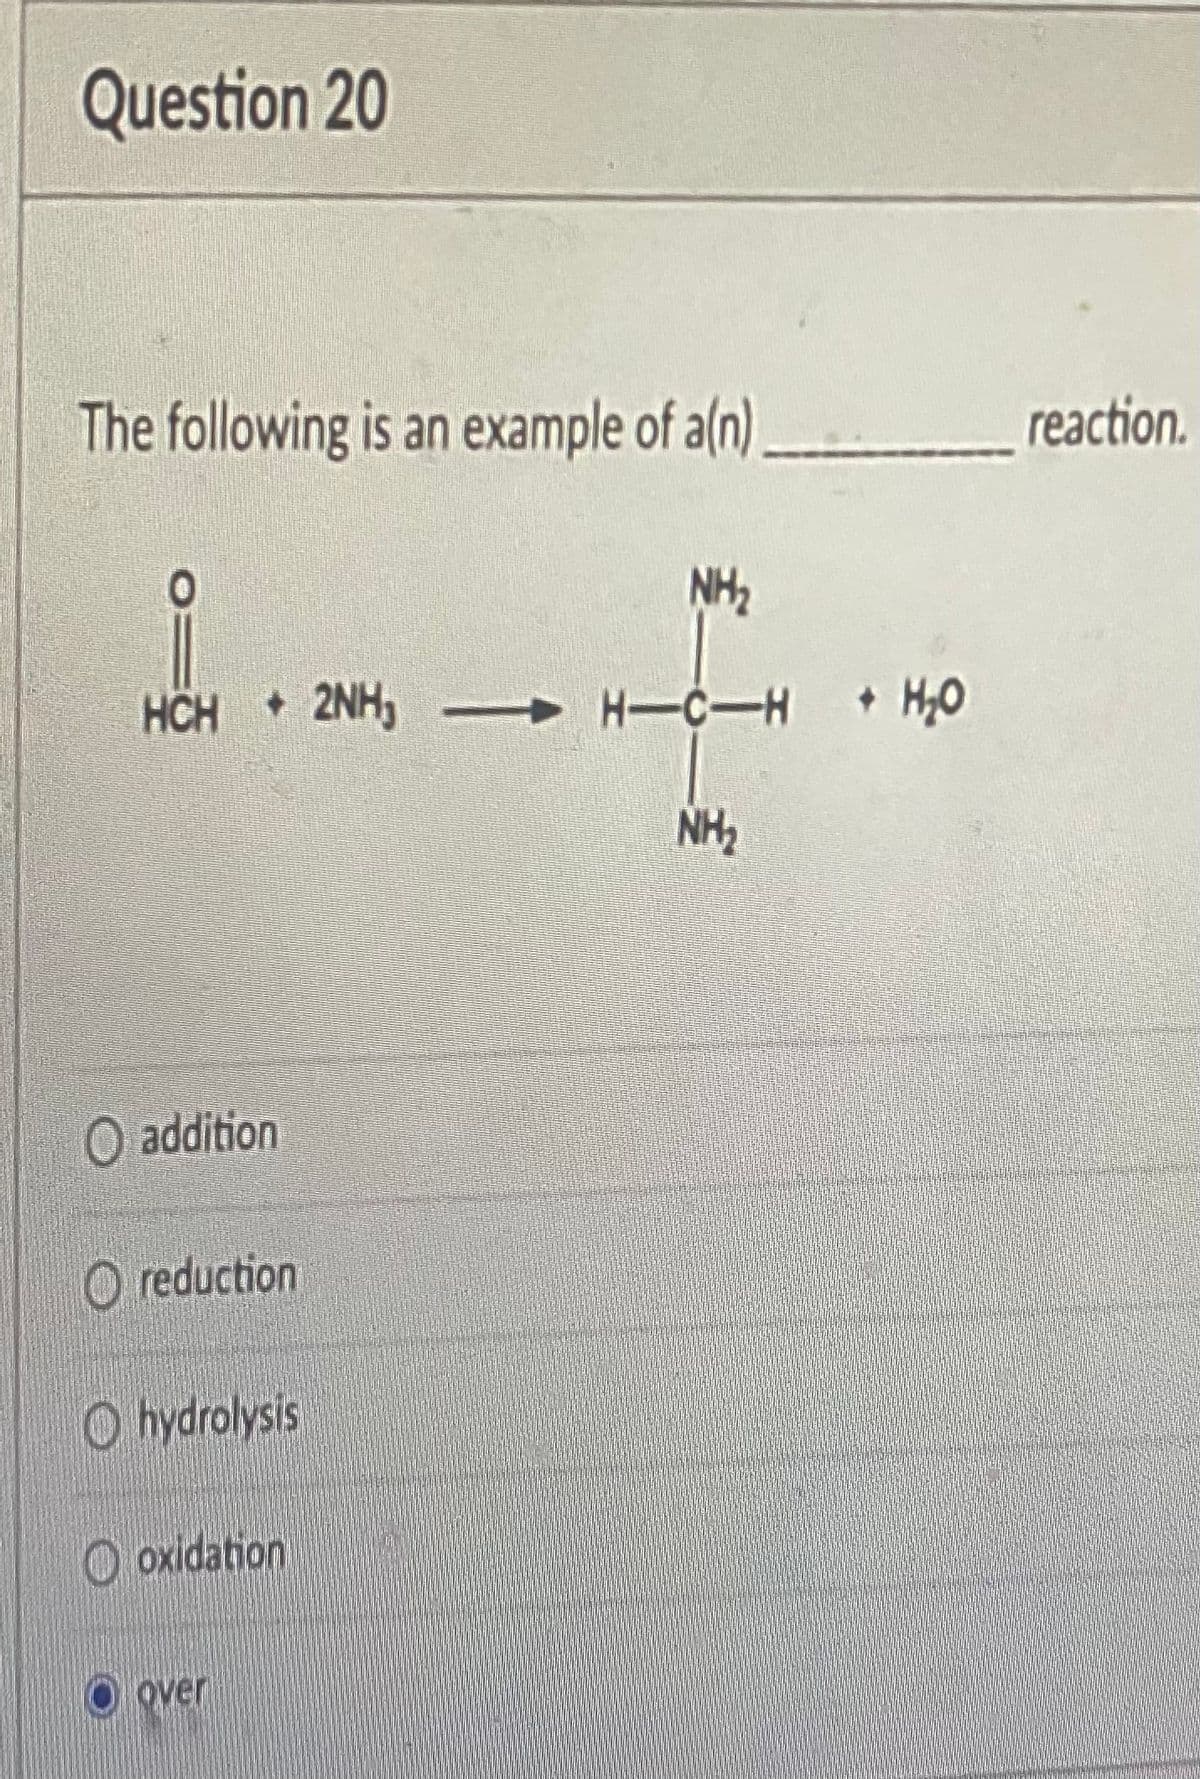 Question 20
The following is an example of a(n)_________ reaction.
NH₂
HCH 2NH₂-
O addition
reduction
hydrolysis
oxidation
over
H-C-H + H₂O
NH₂